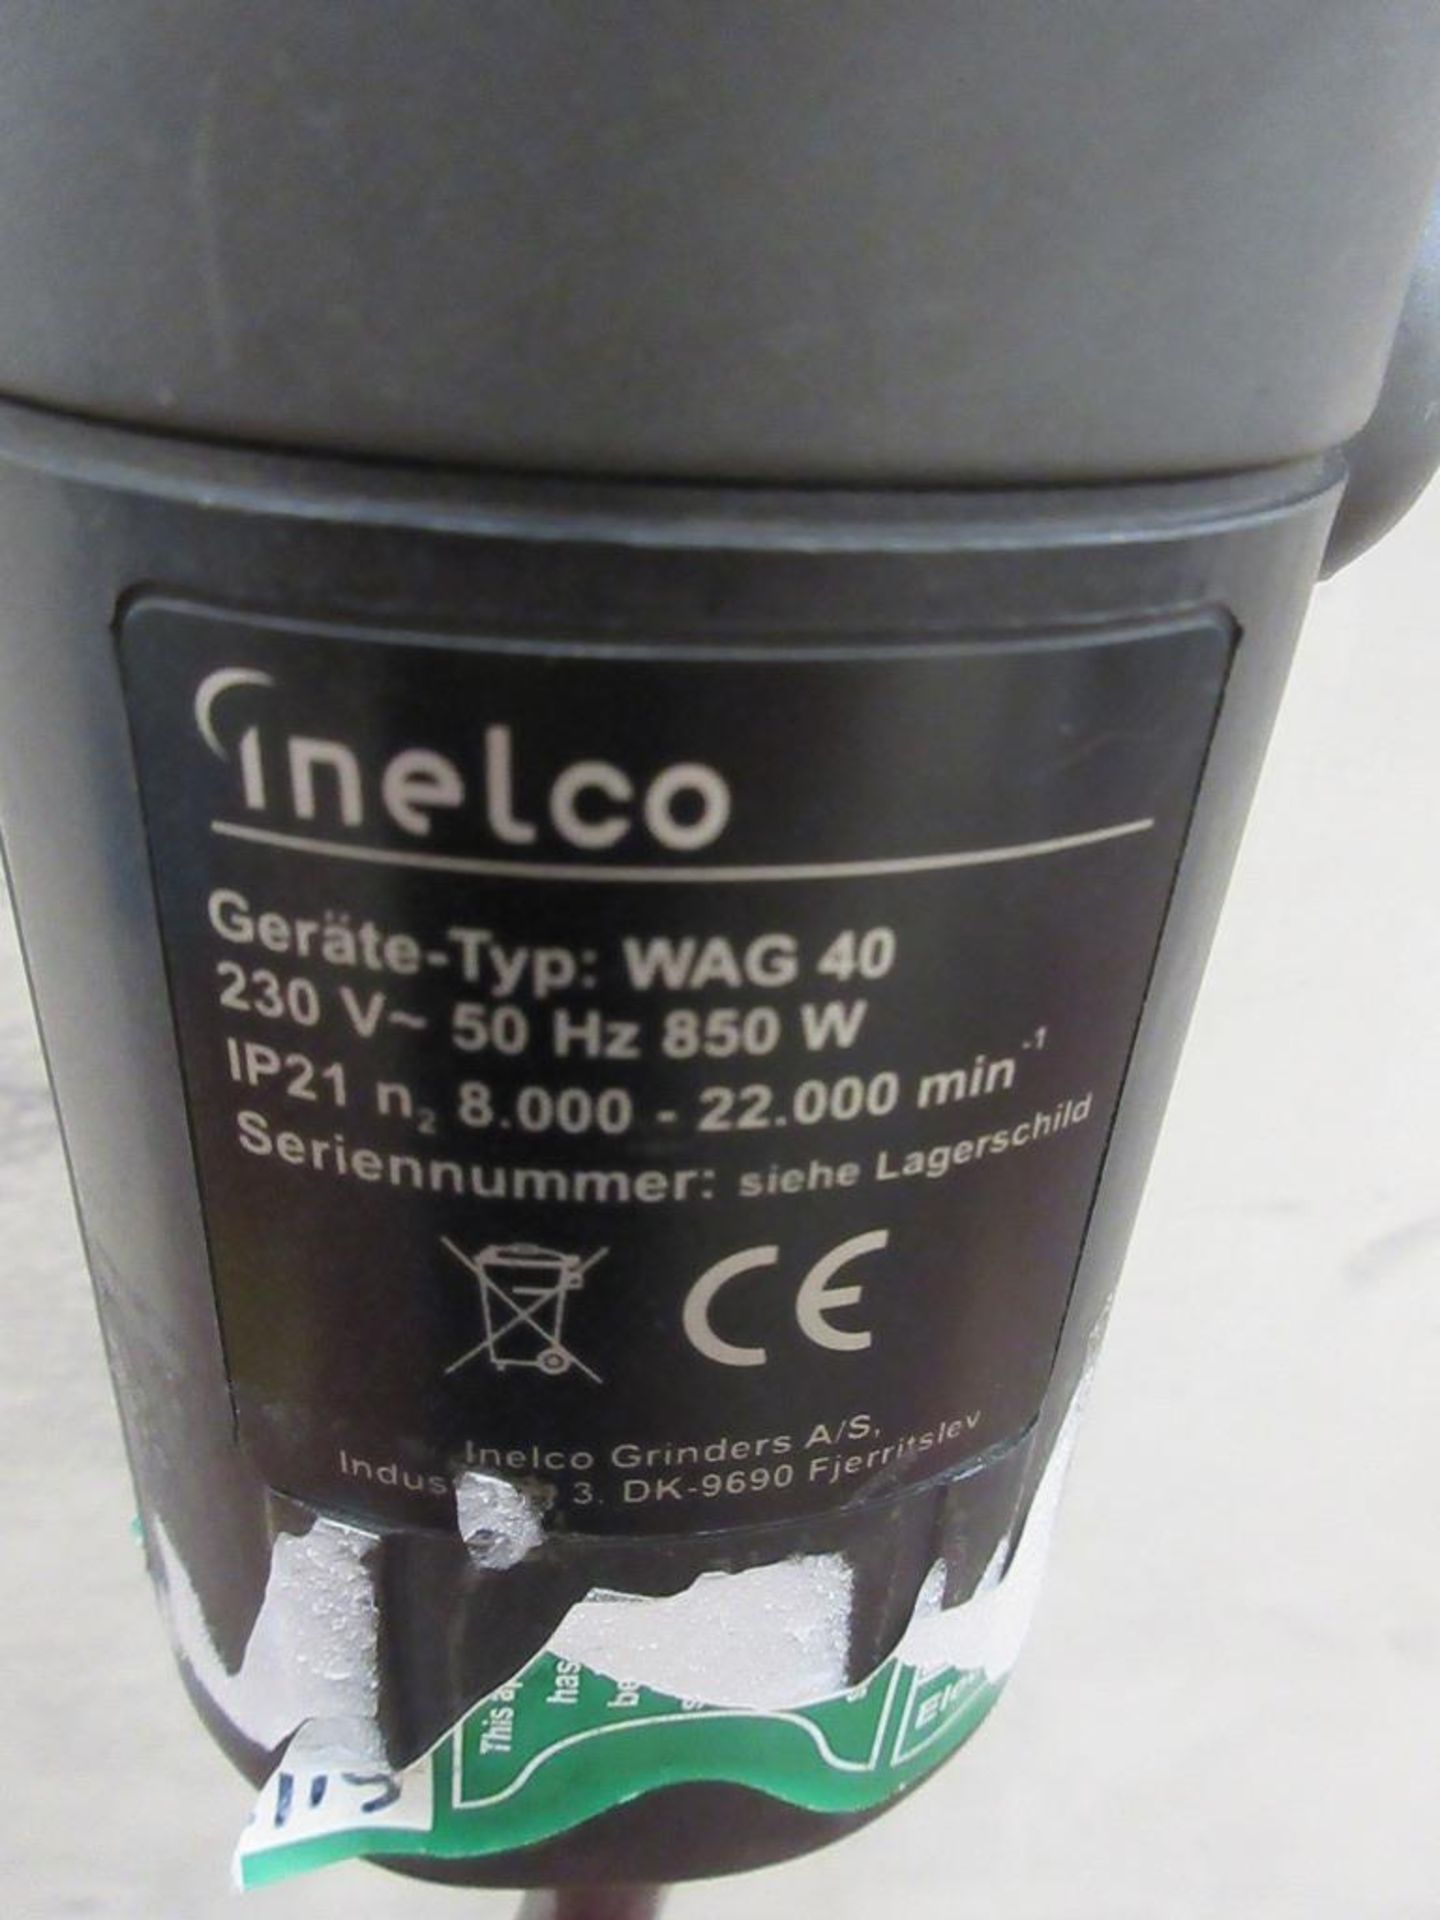 Inelco Neutrix WAG 40, 850W collet grinder, 240v - Image 2 of 3